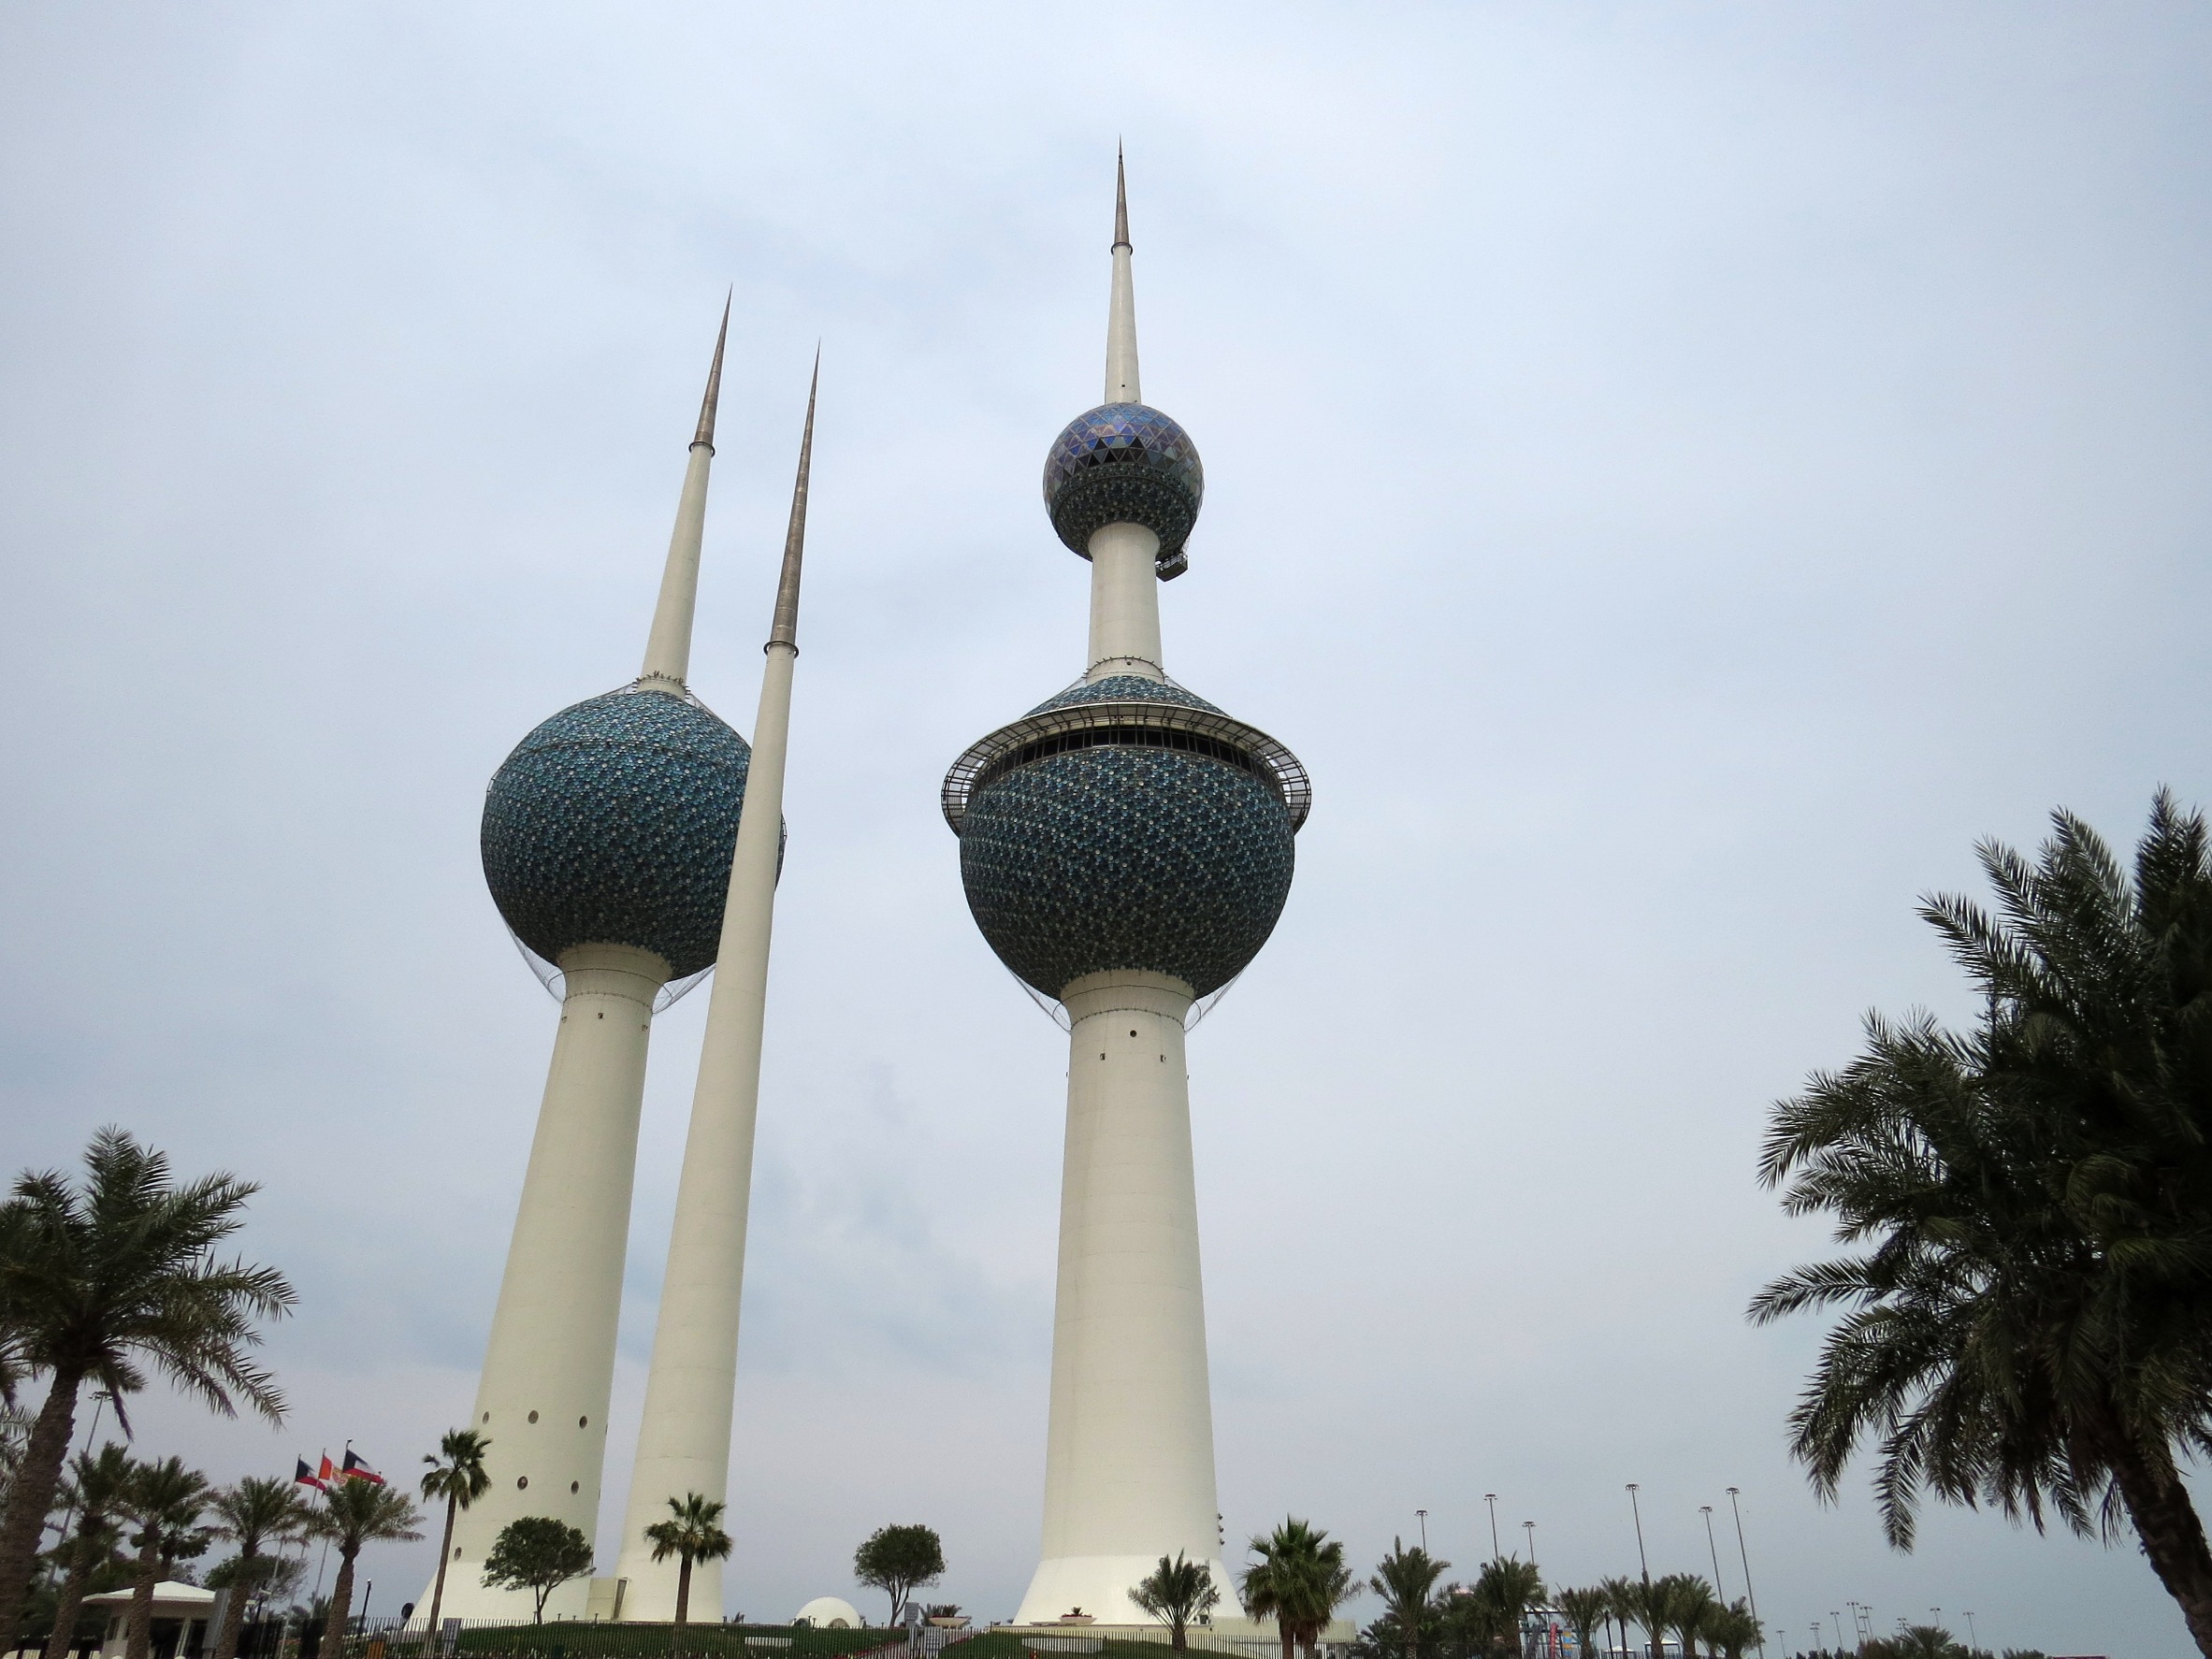 Visit the Kuwait Towers